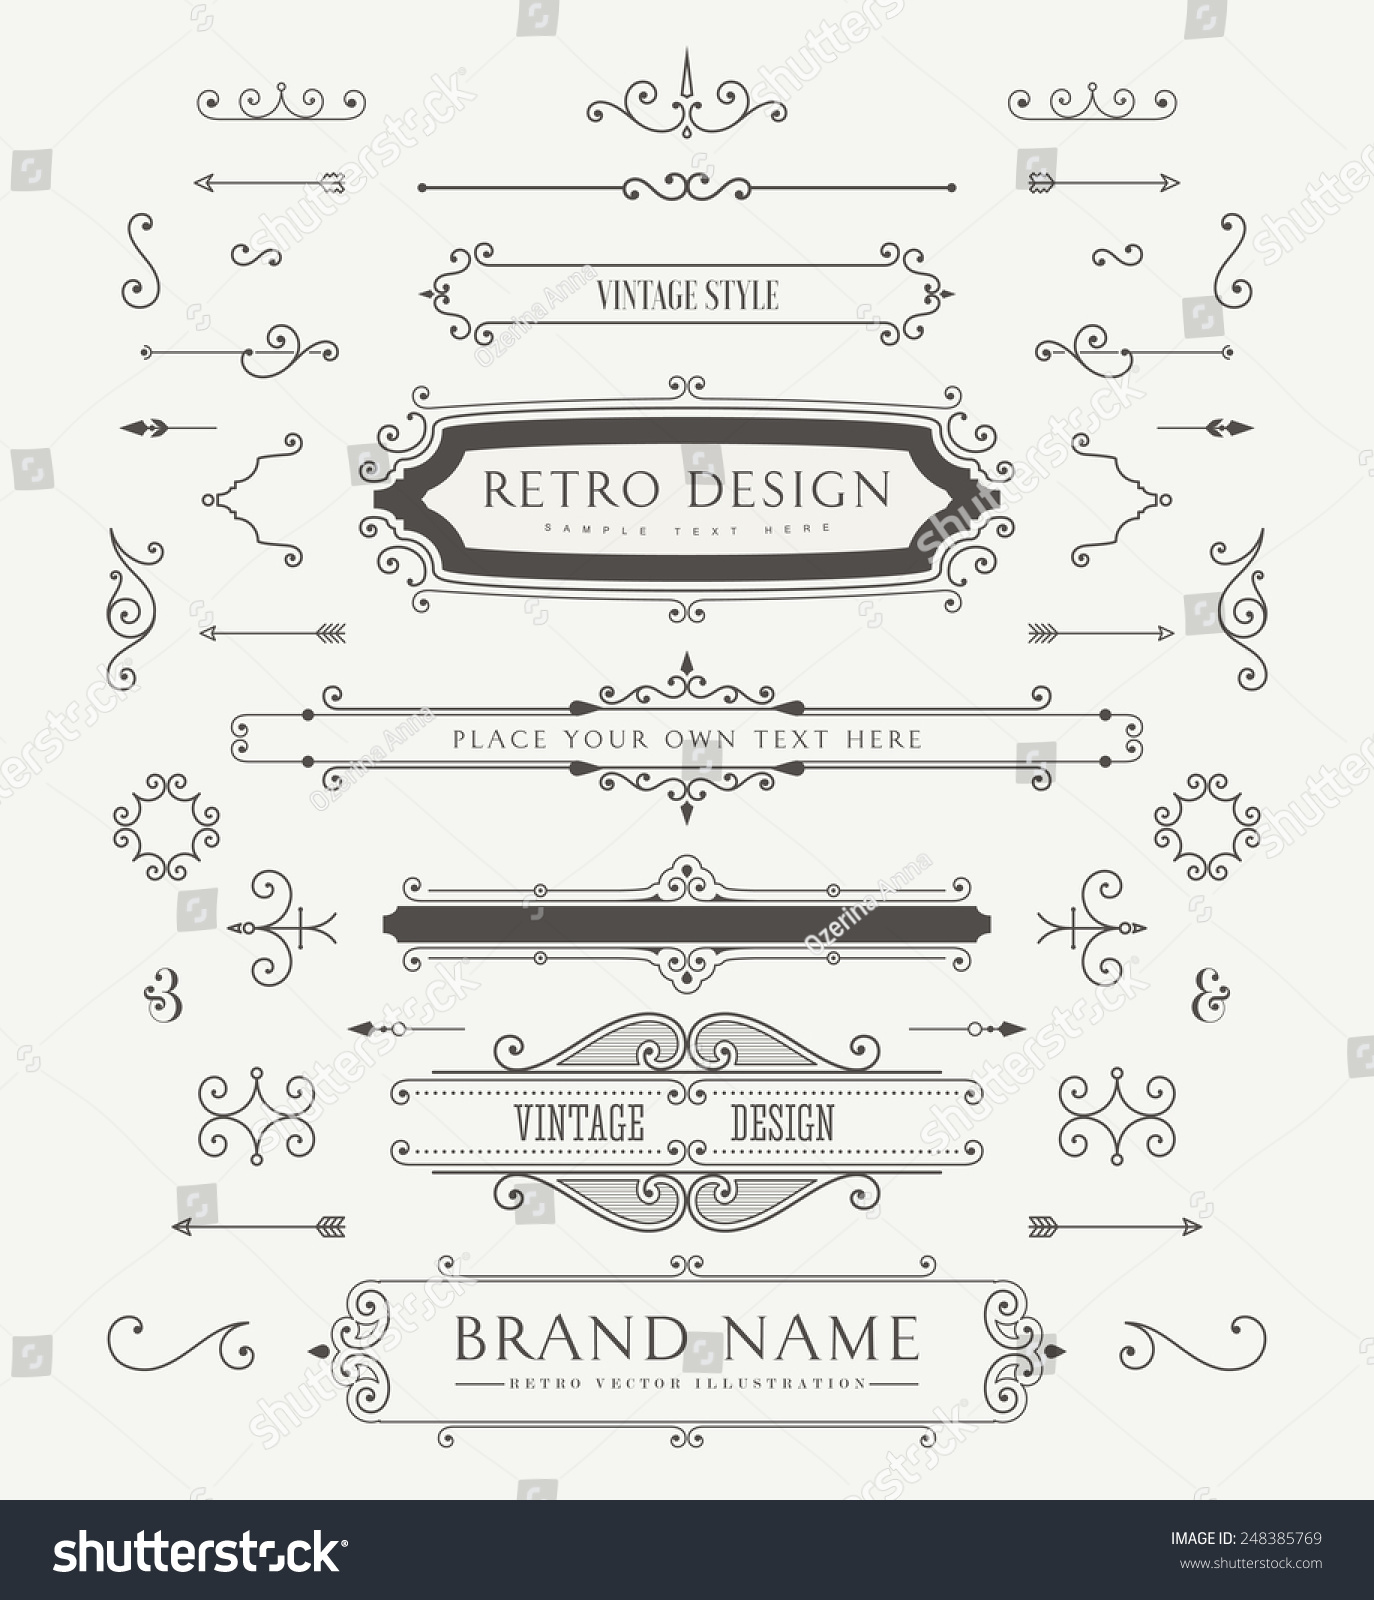 Set of Vintage Decorations Elements. Flourishes Calligraphic Ornaments and Frames. Retro Style Design Collection for Invitations, Banners, Posters, Placards, Badges and Logotypes. #248385769